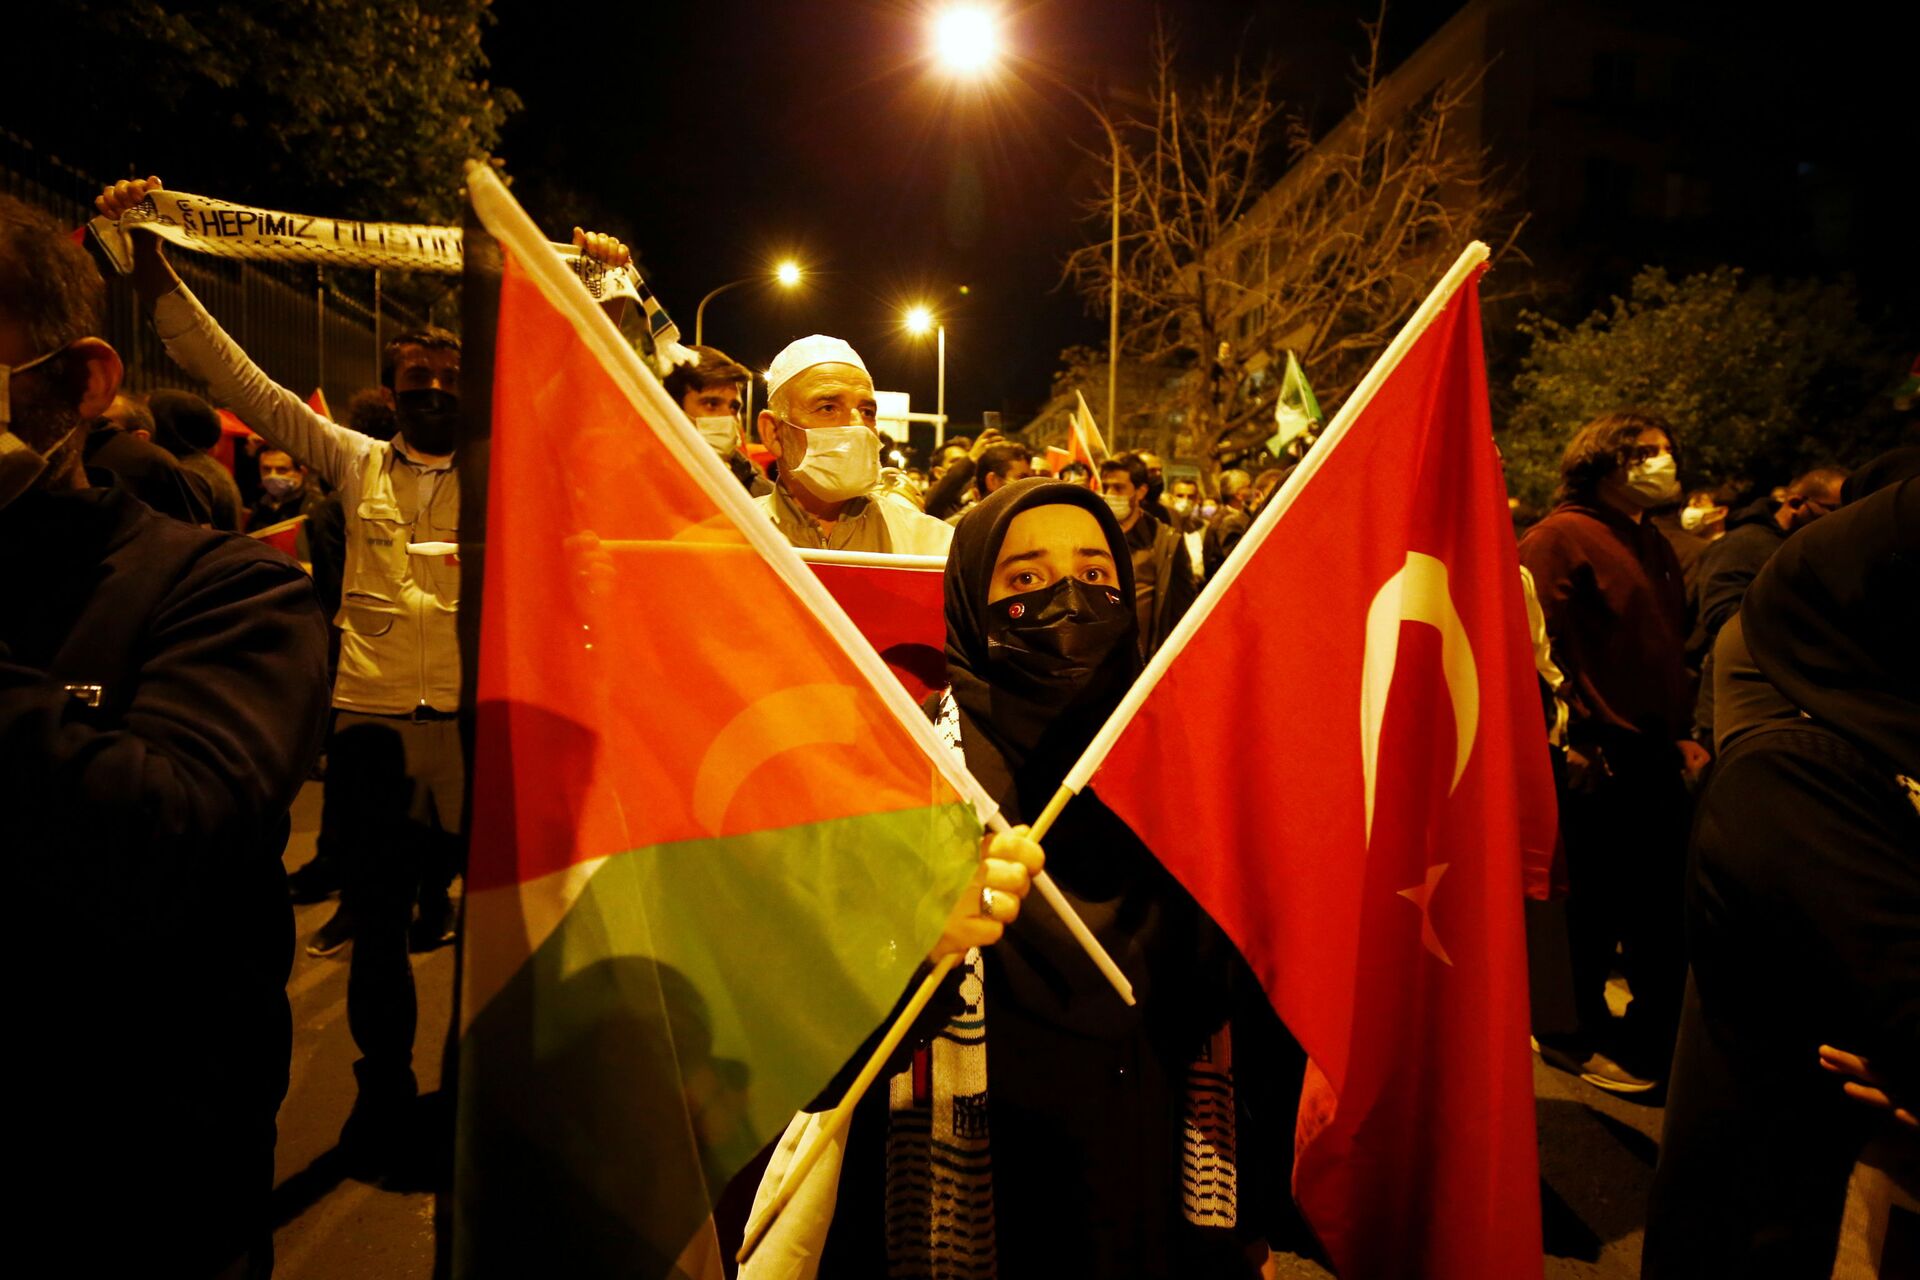 Demonstrators march with Turkish and Palestinian flags during a protest against Israel in Ankara, Turkey late May 10, 2021 - Sputnik International, 1920, 04.04.2022